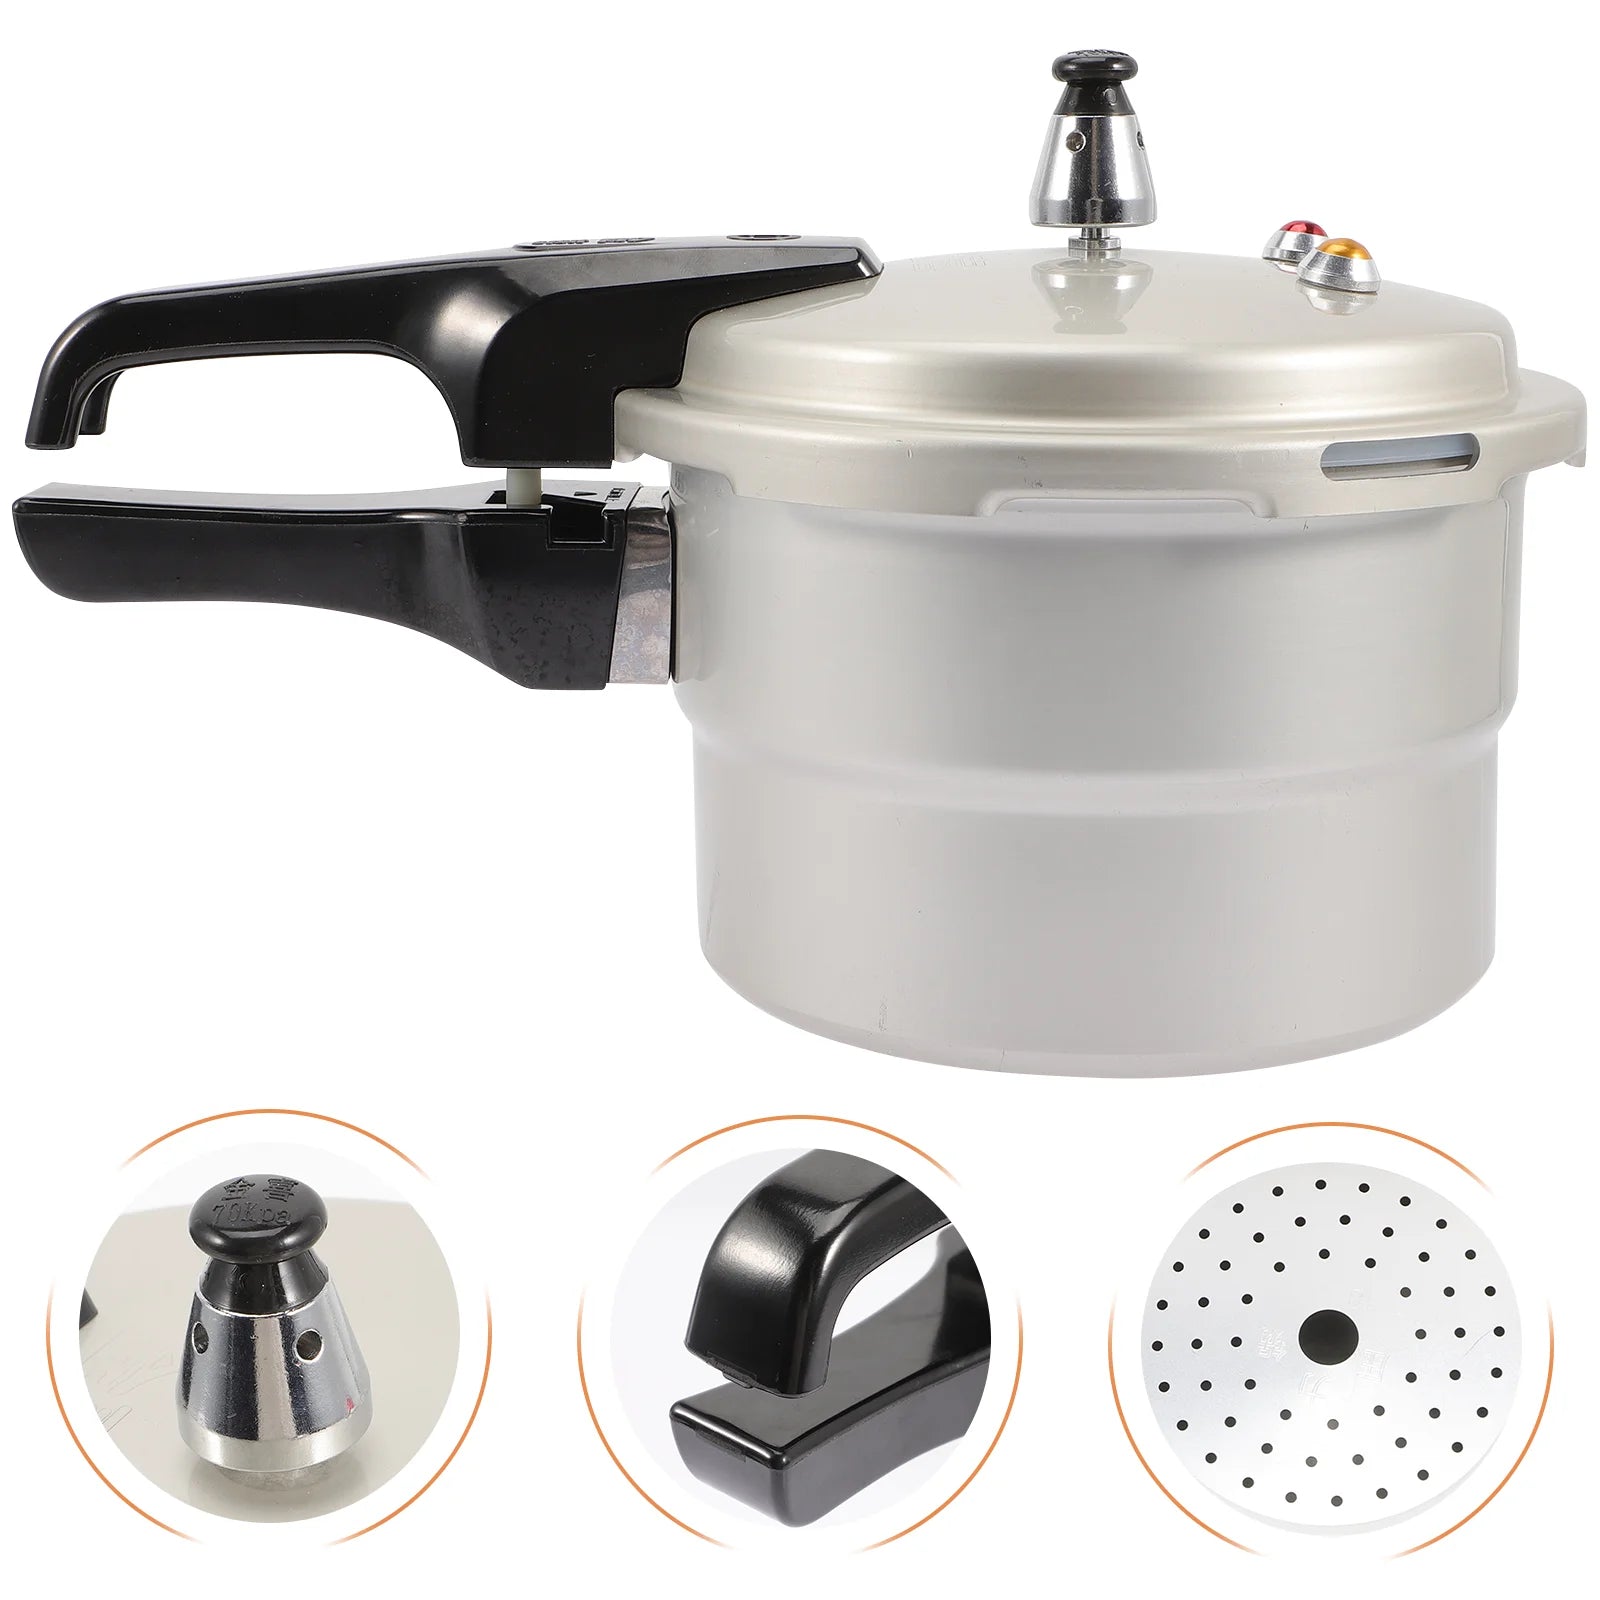 Pressure Cooker Stainless Steel Cookware Portable Gas Stove Aluminum Multipurpose Pot